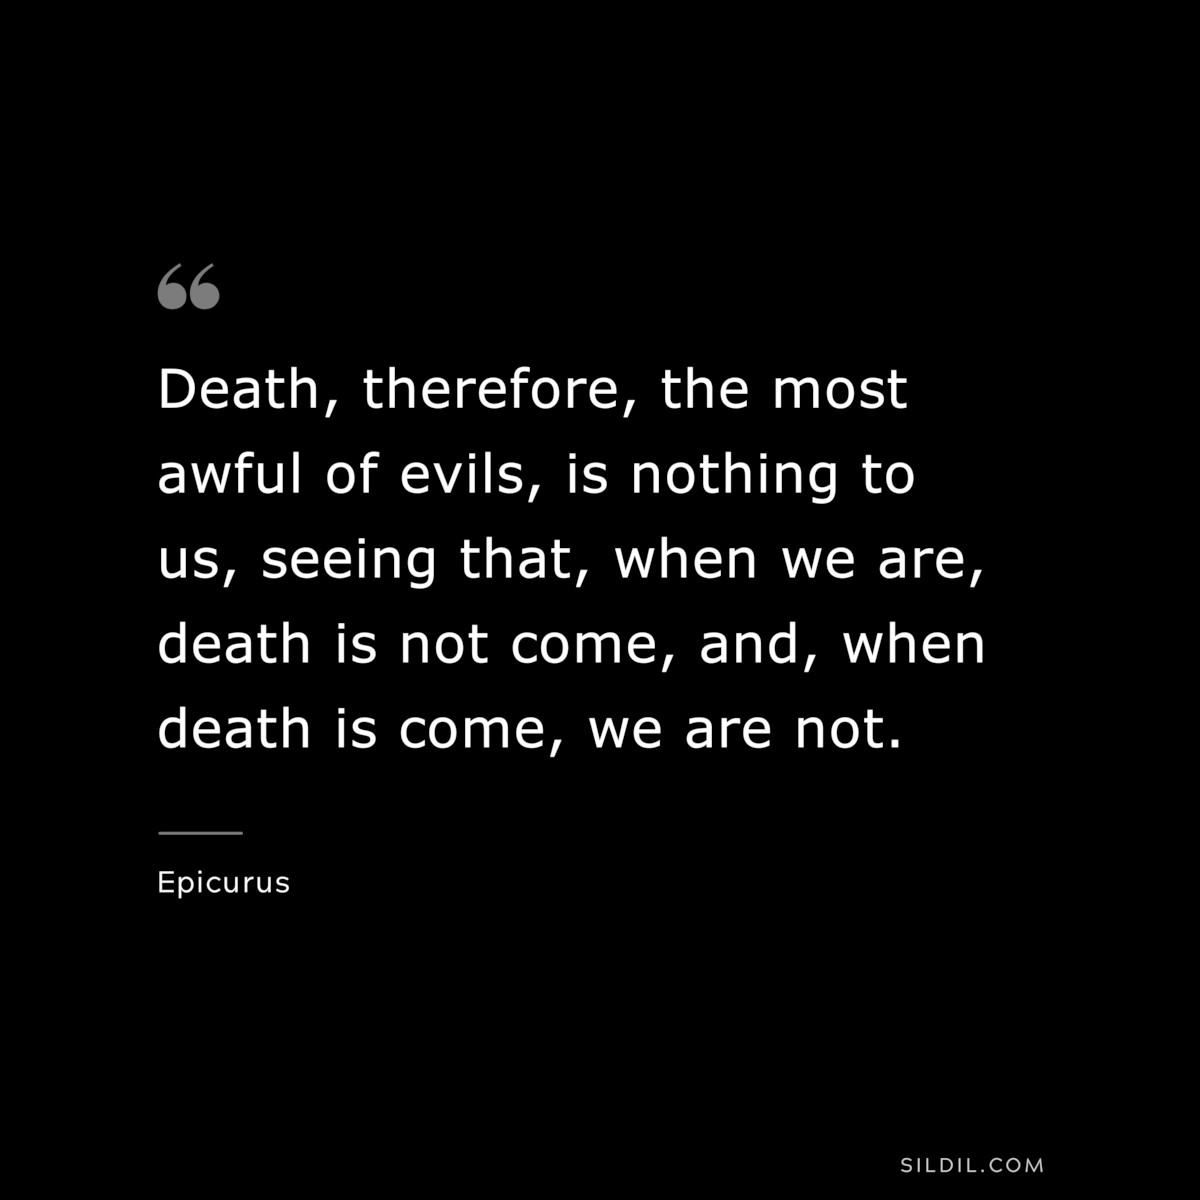 Death, therefore, the most awful of evils, is nothing to us, seeing that, when we are, death is not come, and, when death is come, we are not. — Epicurus